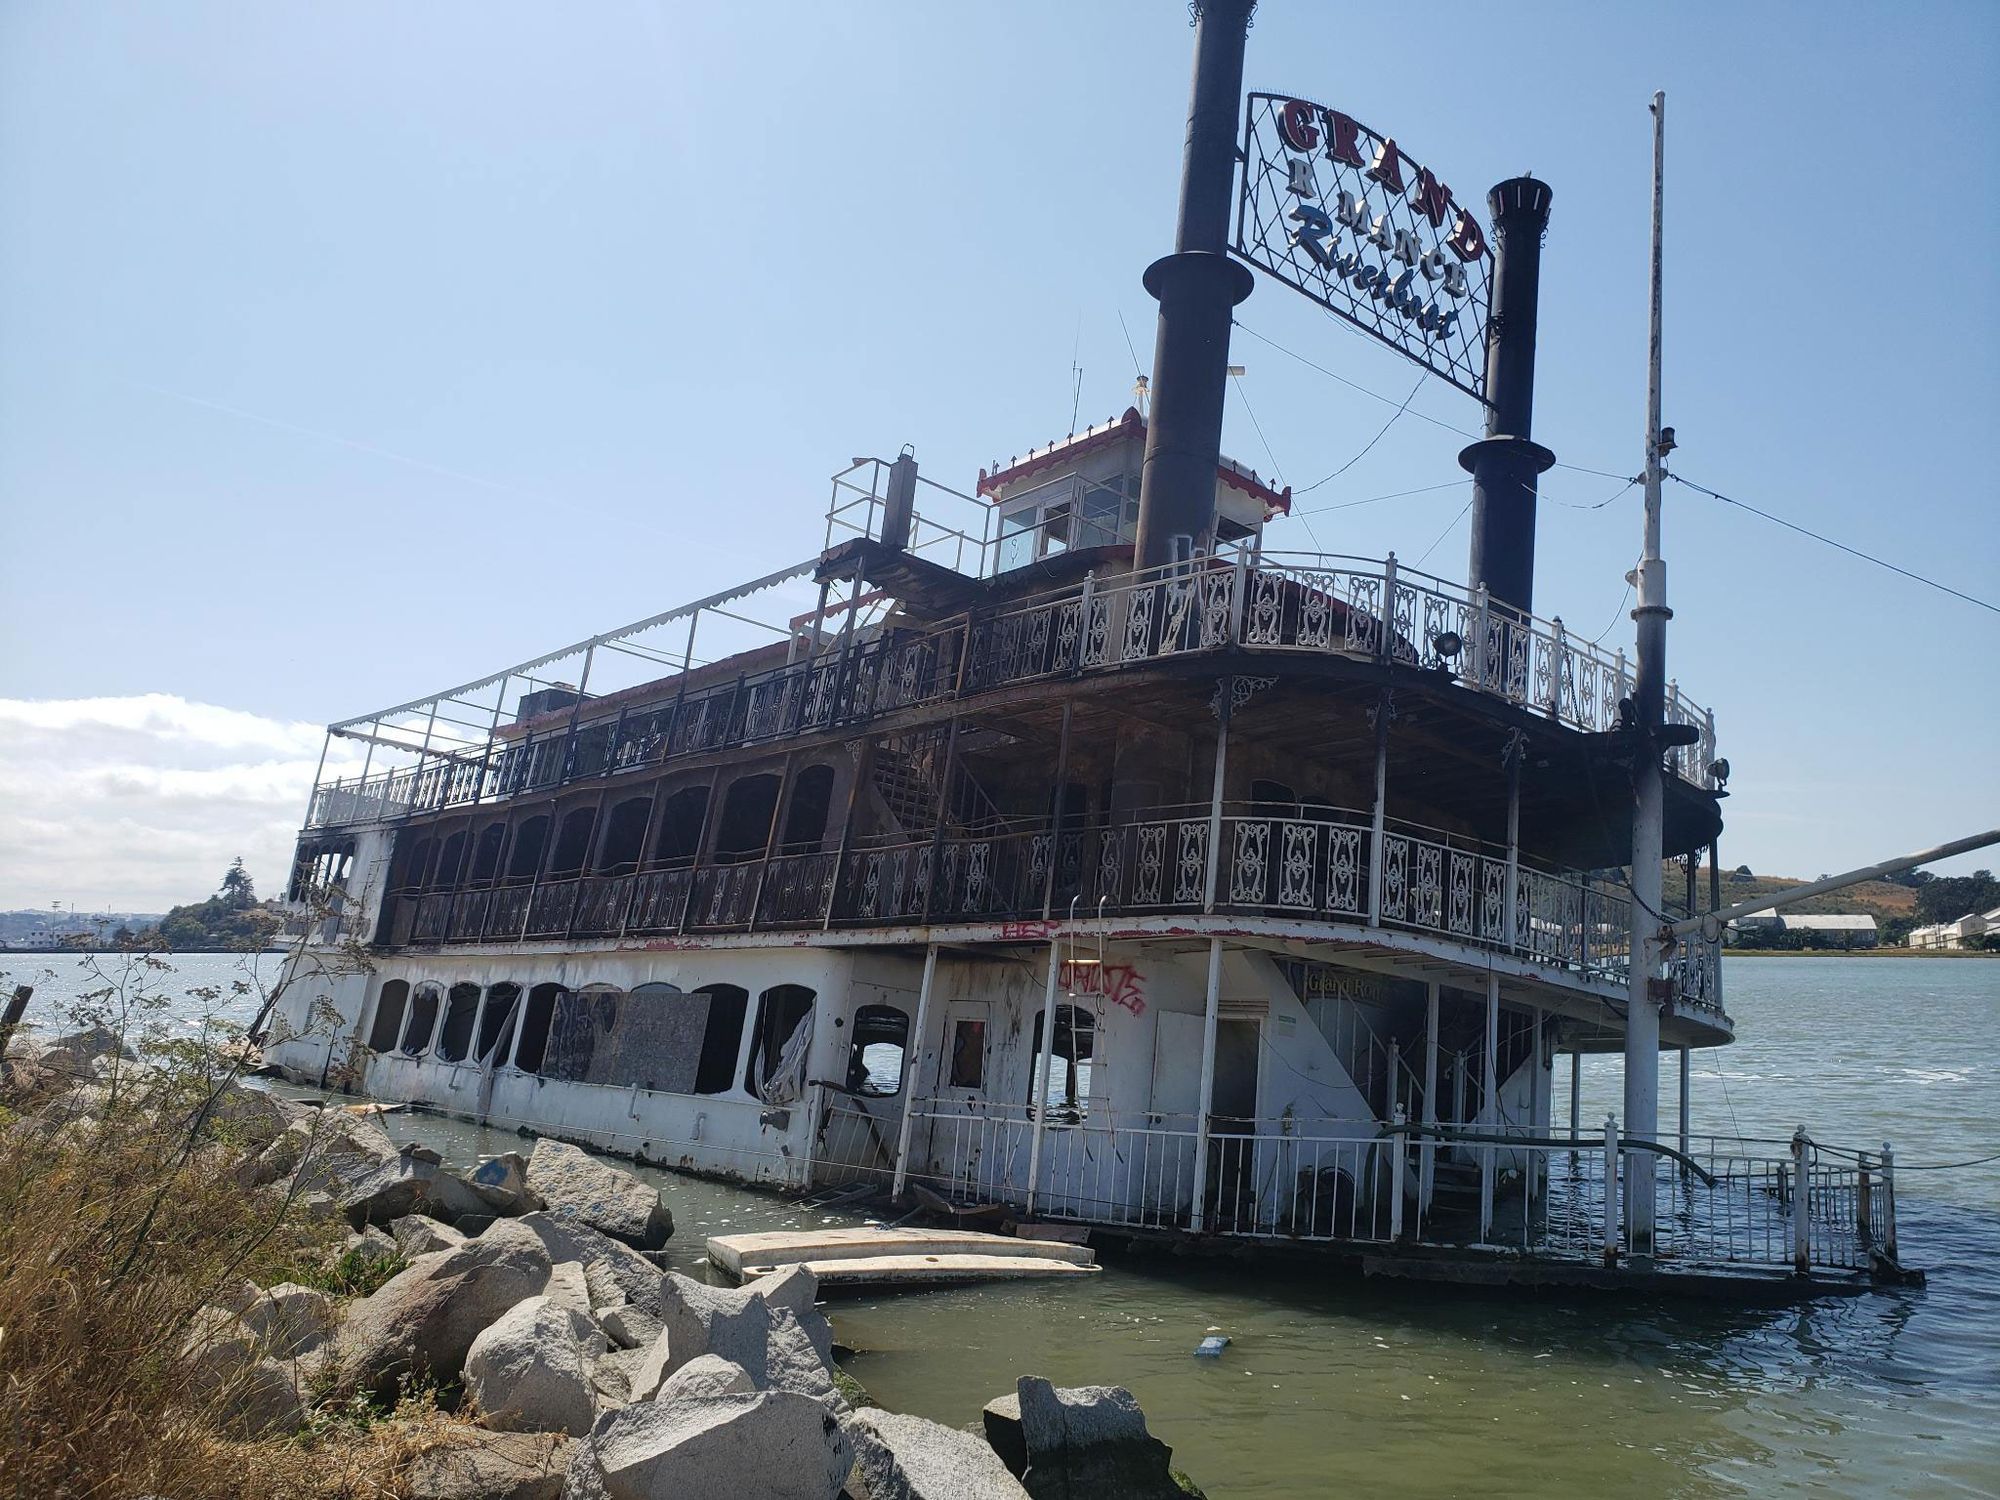 The Grand Romance riverboat was left submerged after a fire on Saturday. 